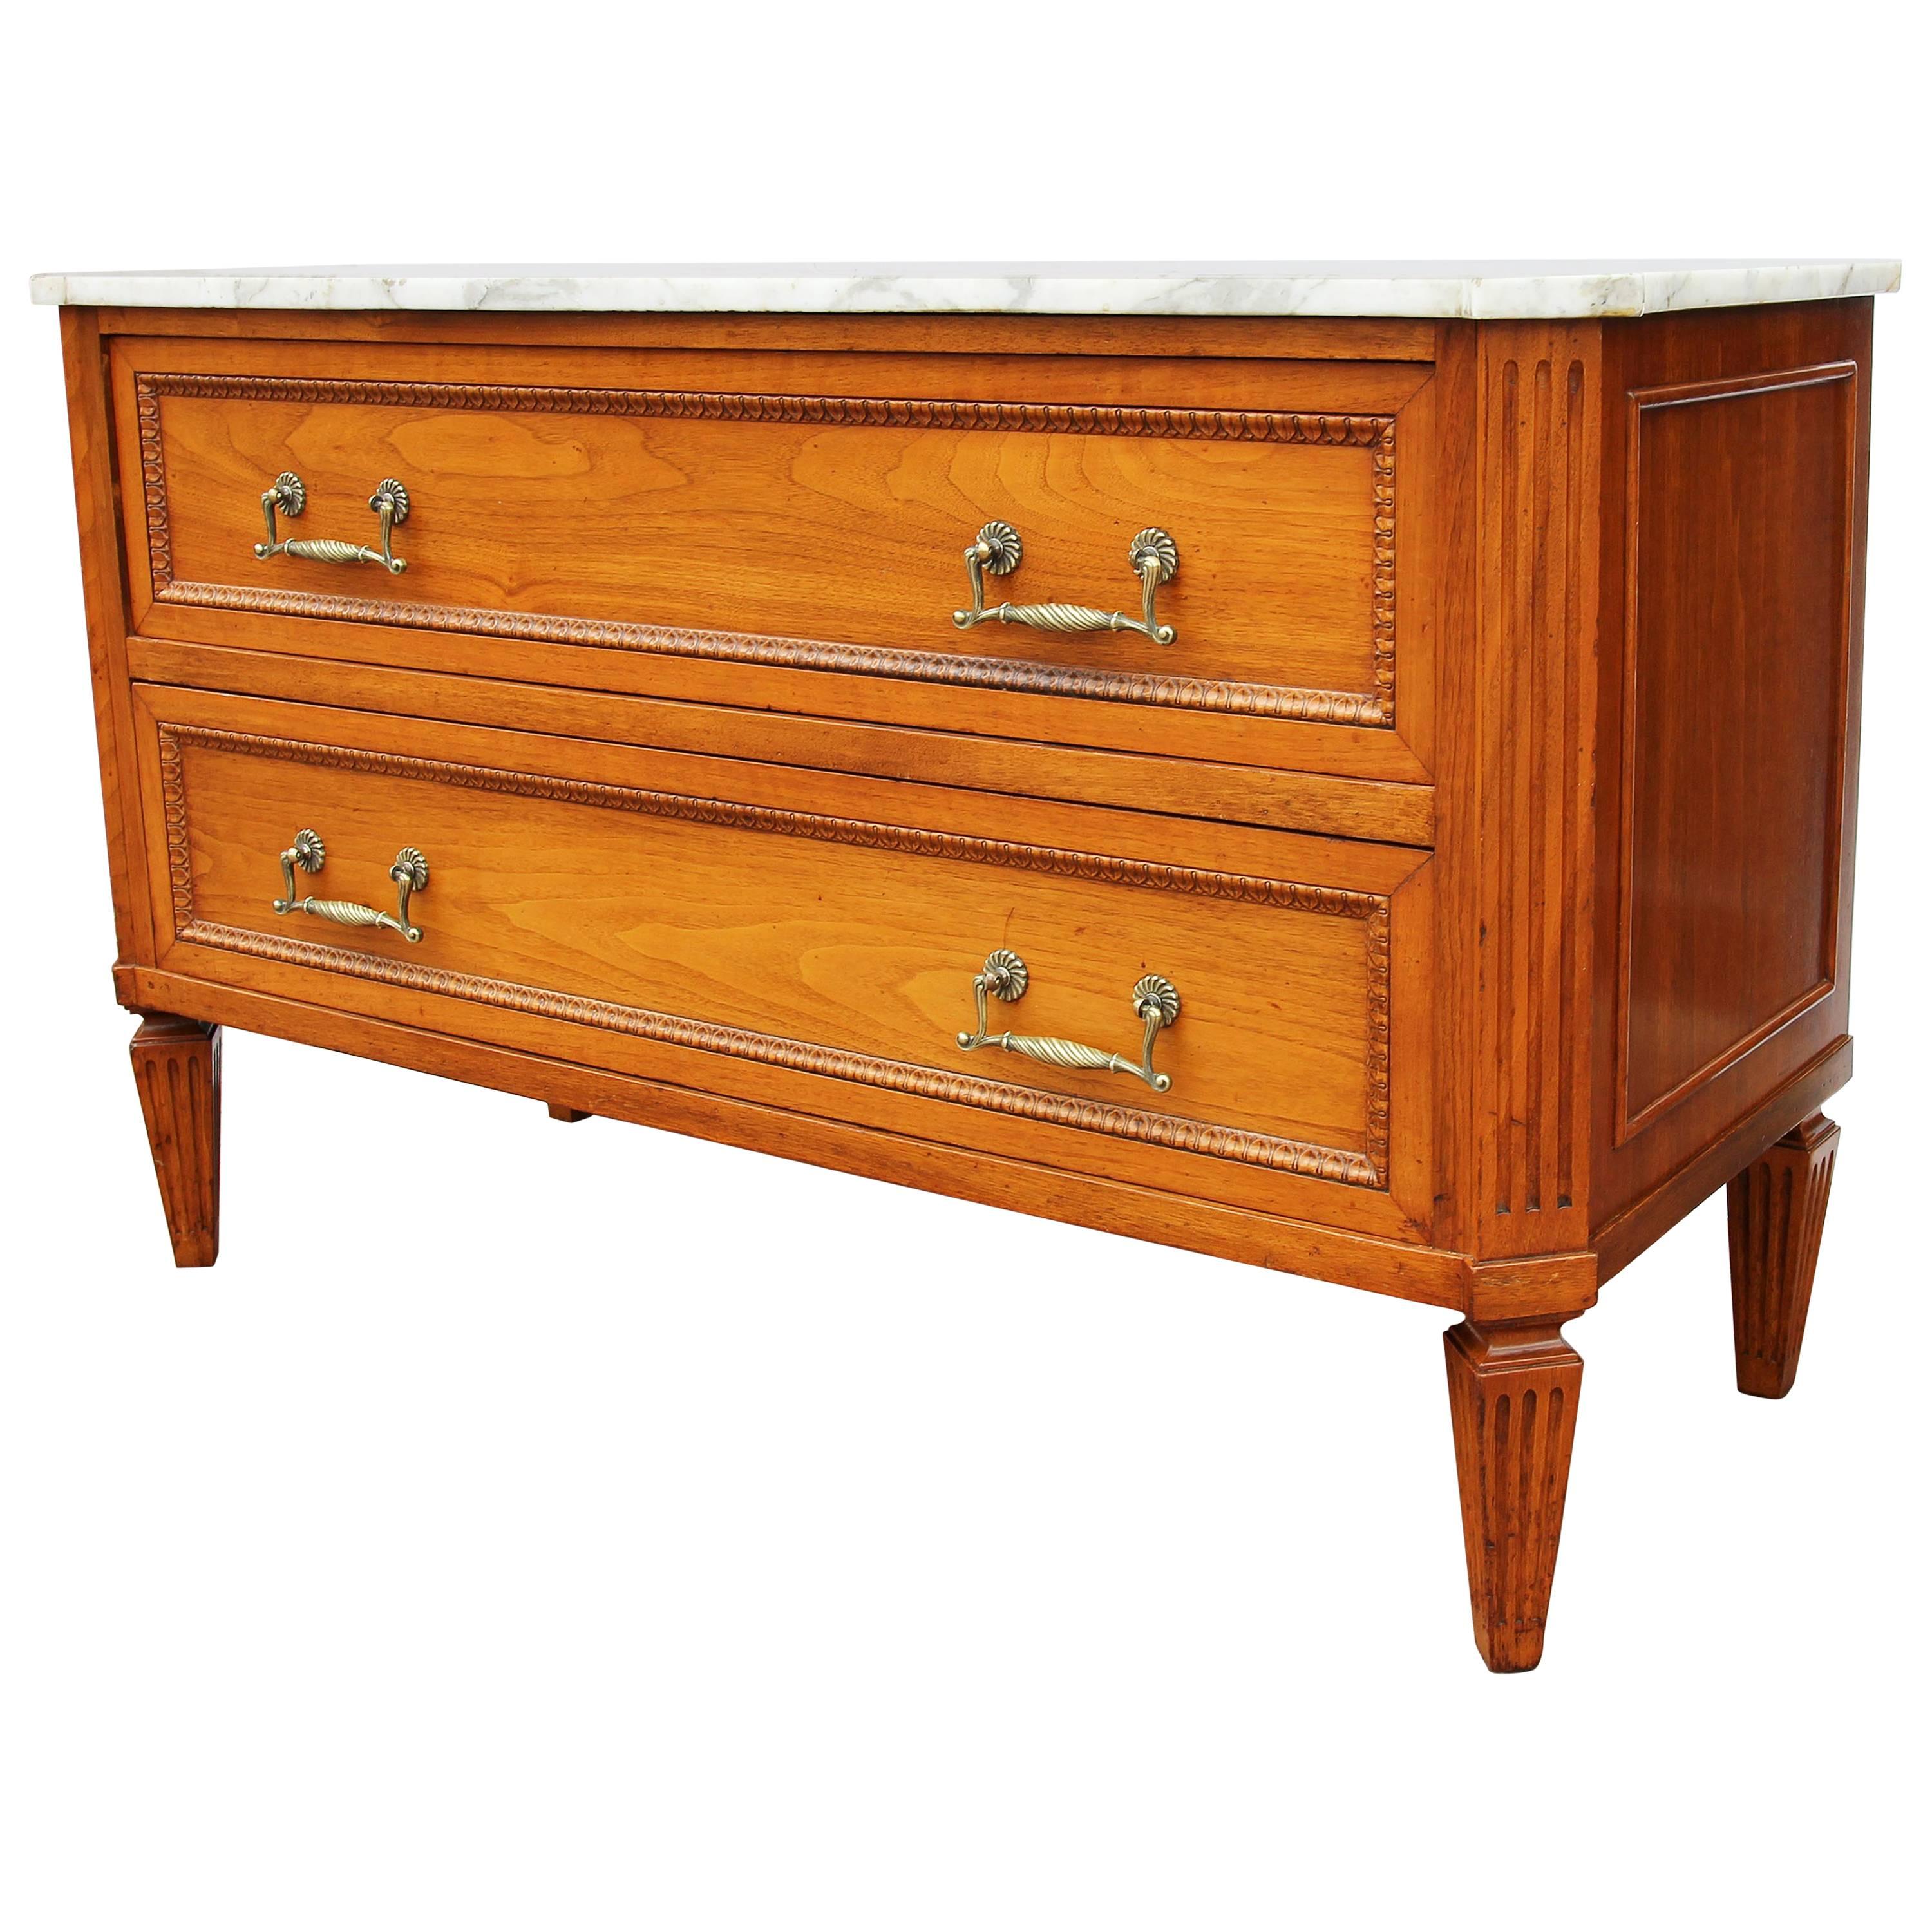 Louis XVI Style Walnut and Marble Low Commode Neoclassical